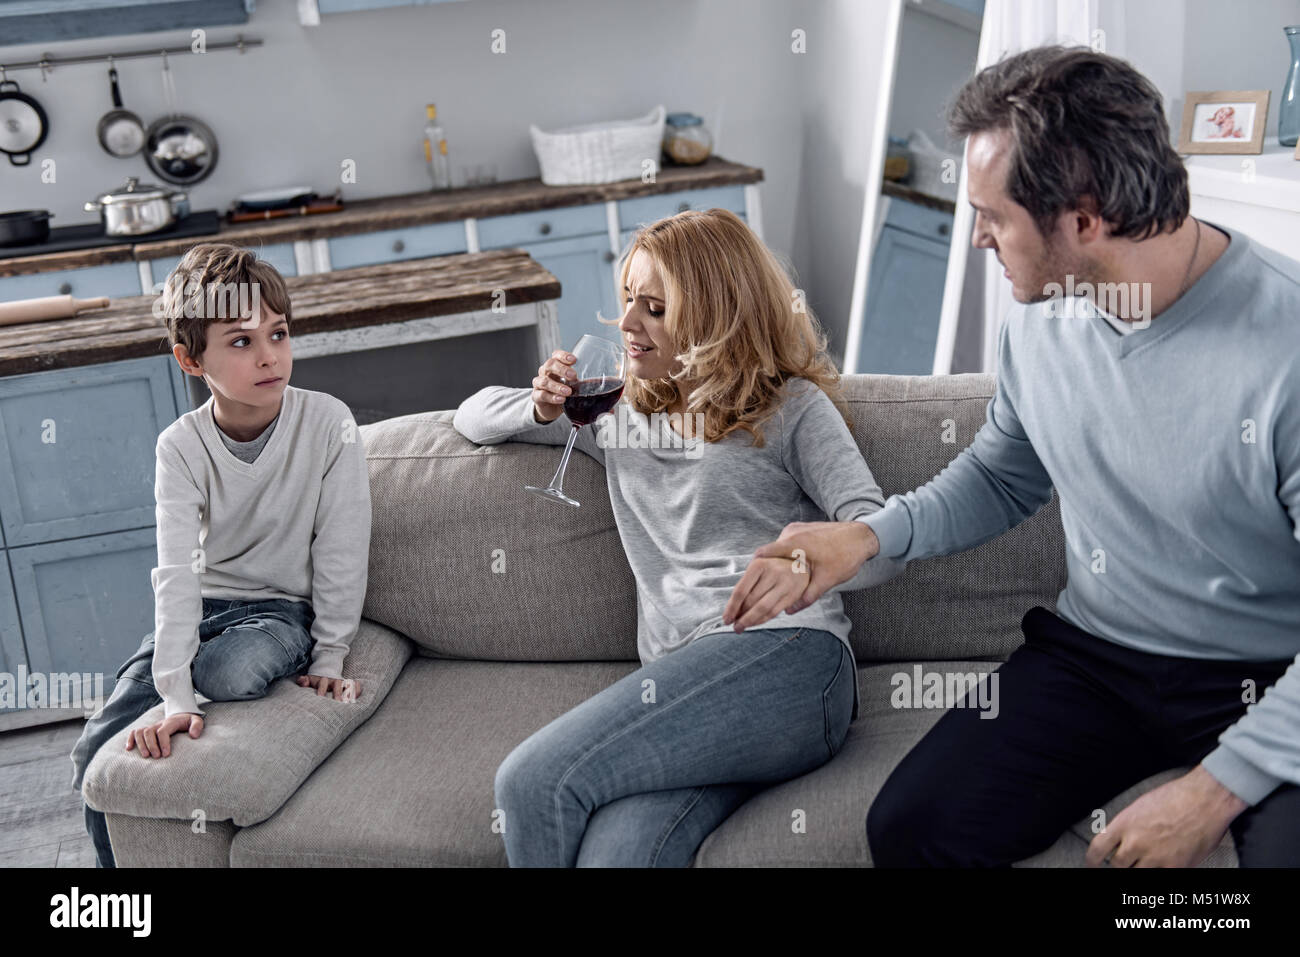 Emotional woman drinking wine and her husband preventing it Stock Photo